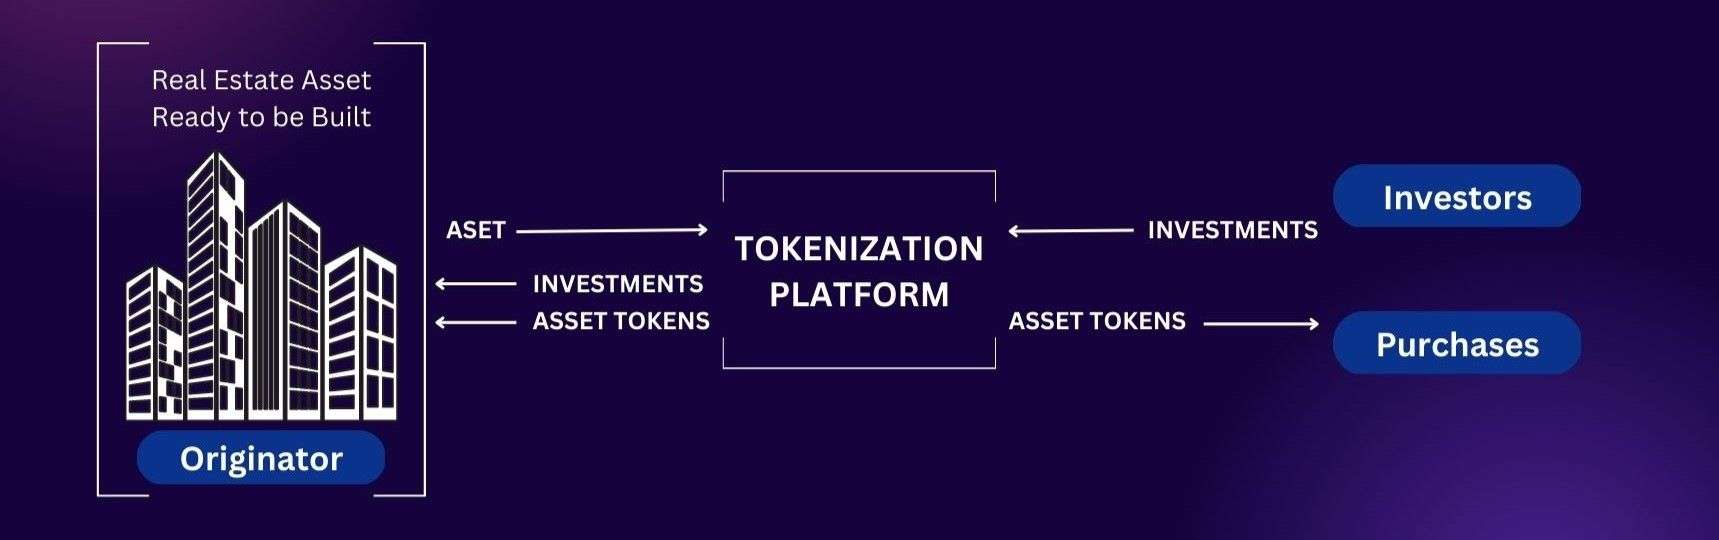 How does real estate tokenization work?